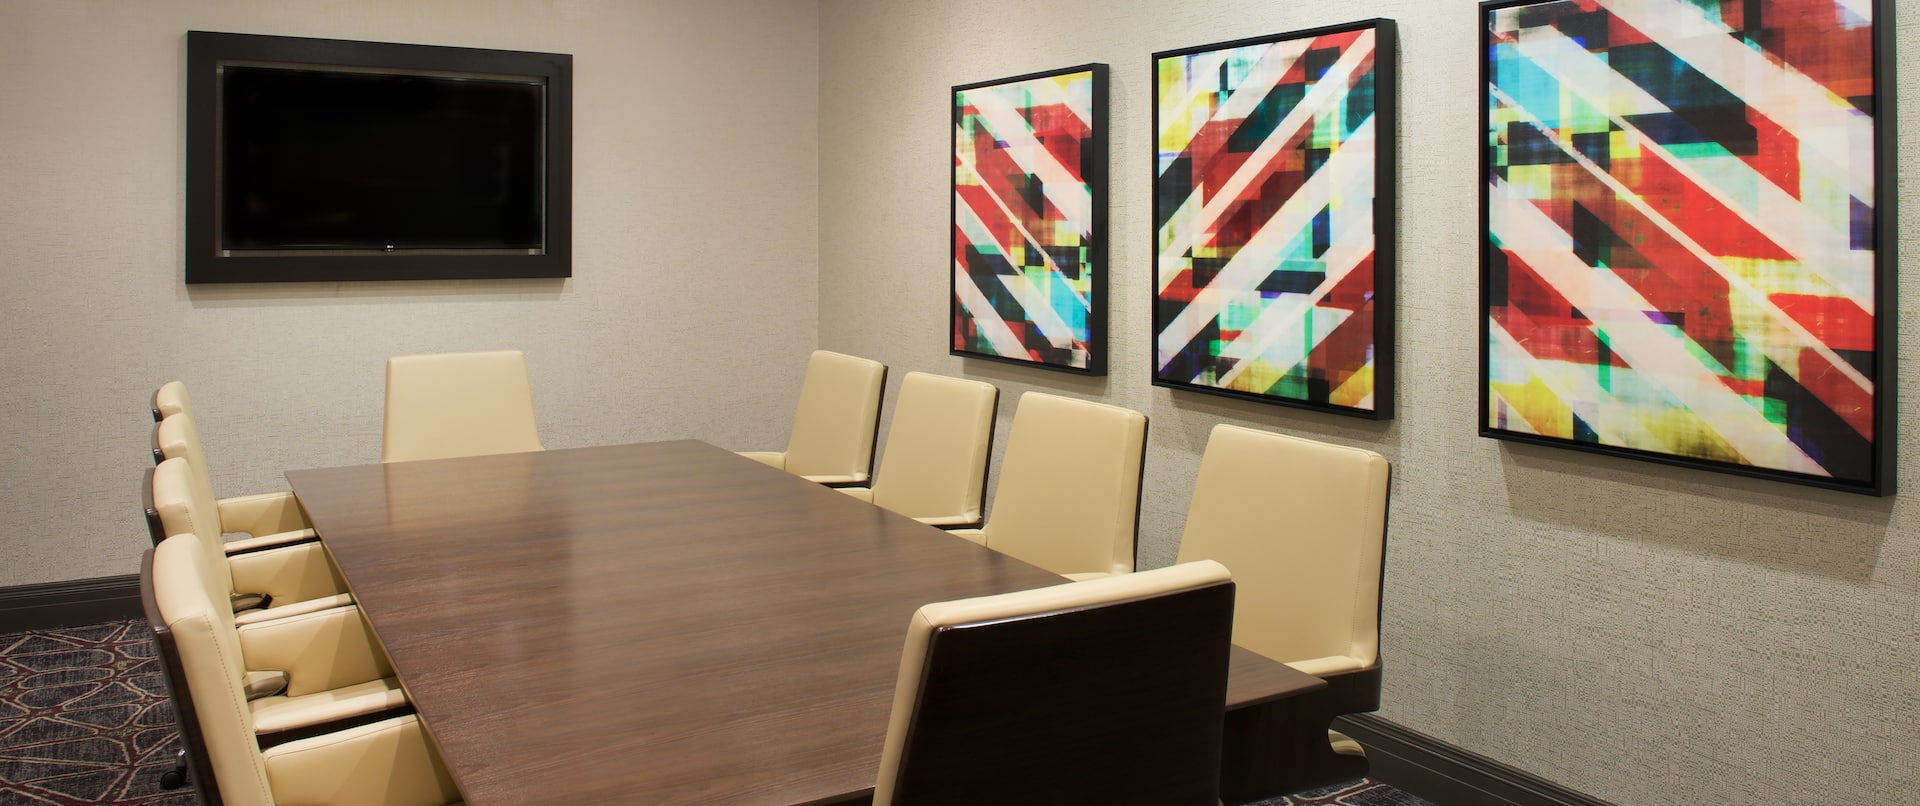 Meeting Room with Tables, Office Chairs and Wall Mounted HDTV